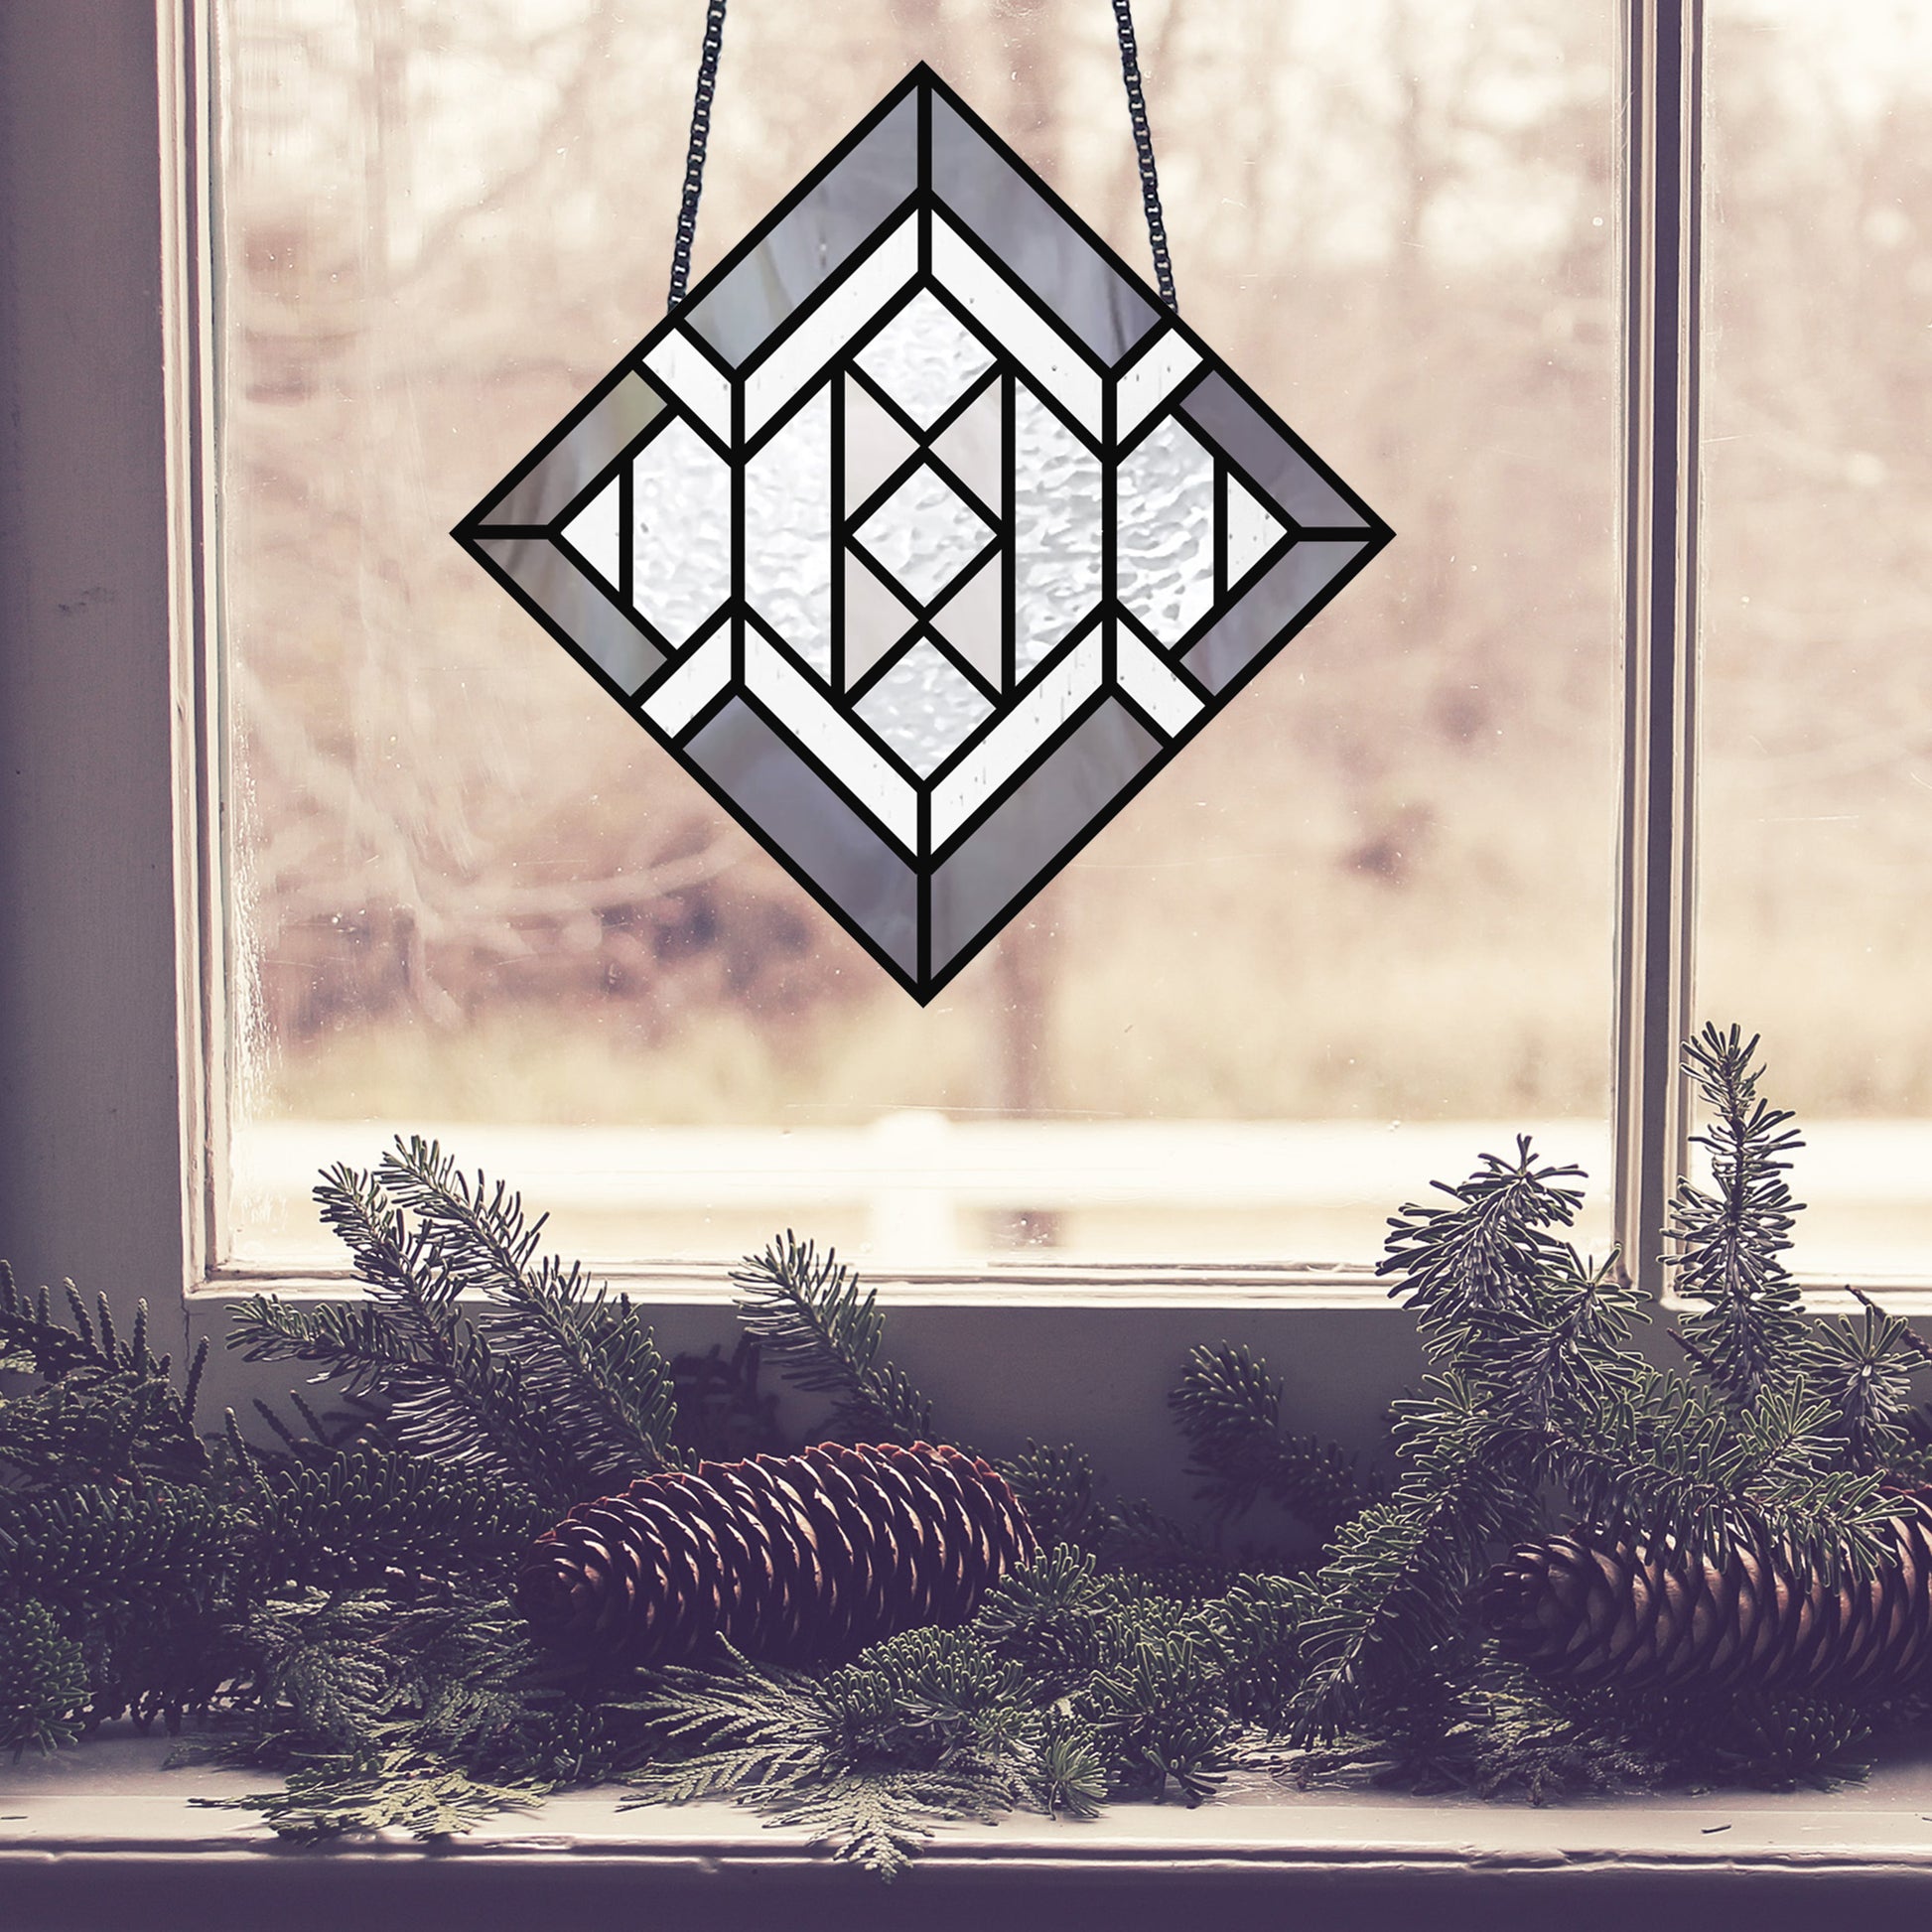 Beginner stained glass pattern for a diamond, instant PDF download, shown hanging in a window with pine cones